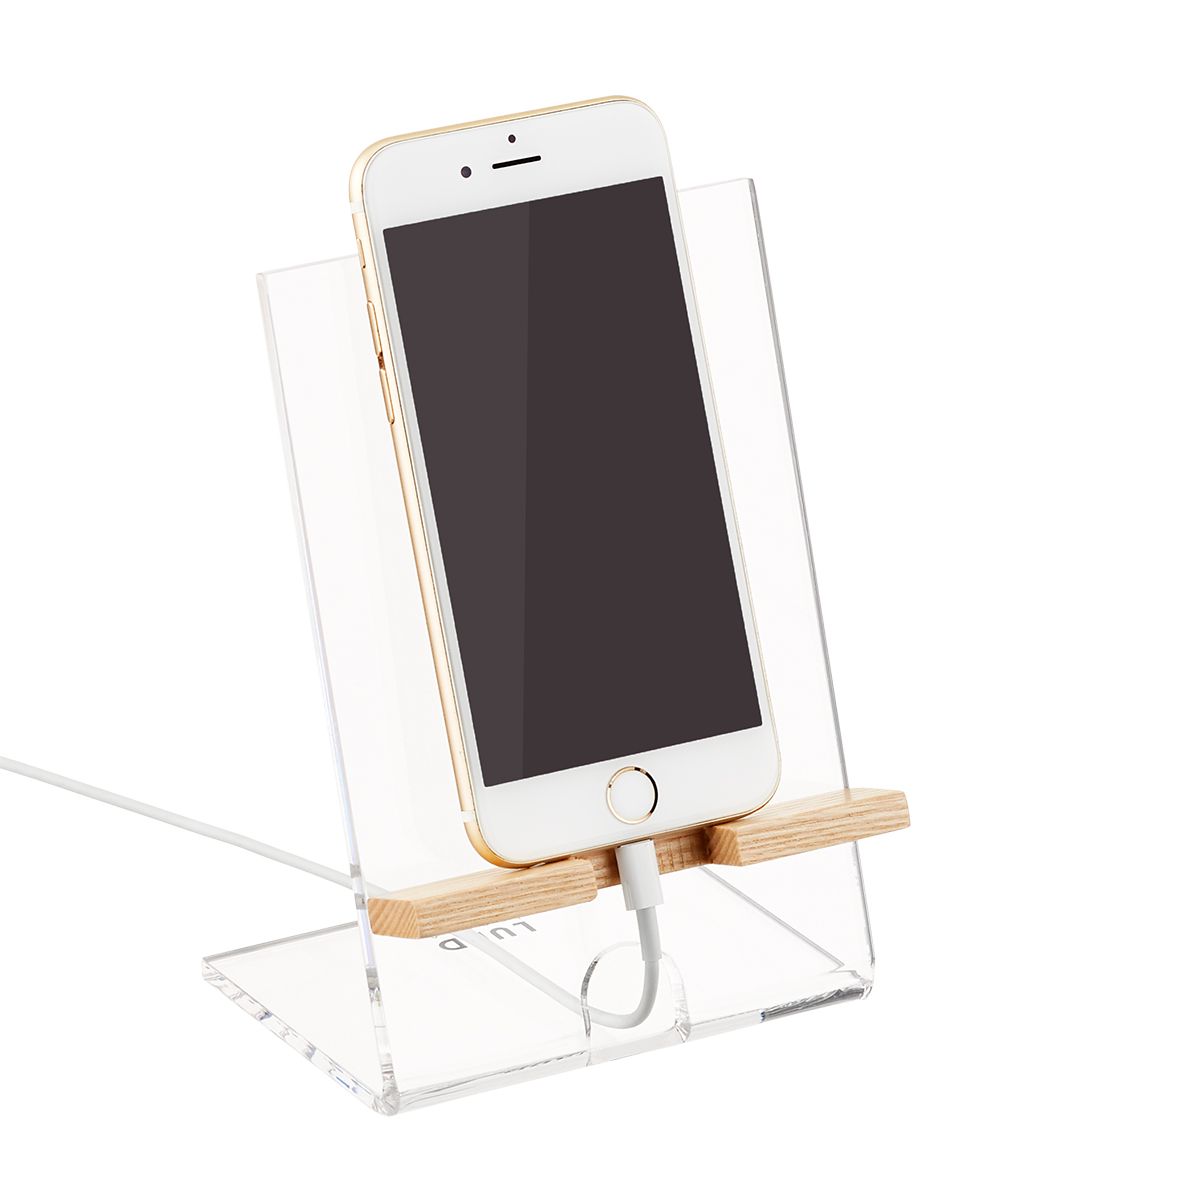 Lund London Blair Phone Holder | The Container Store